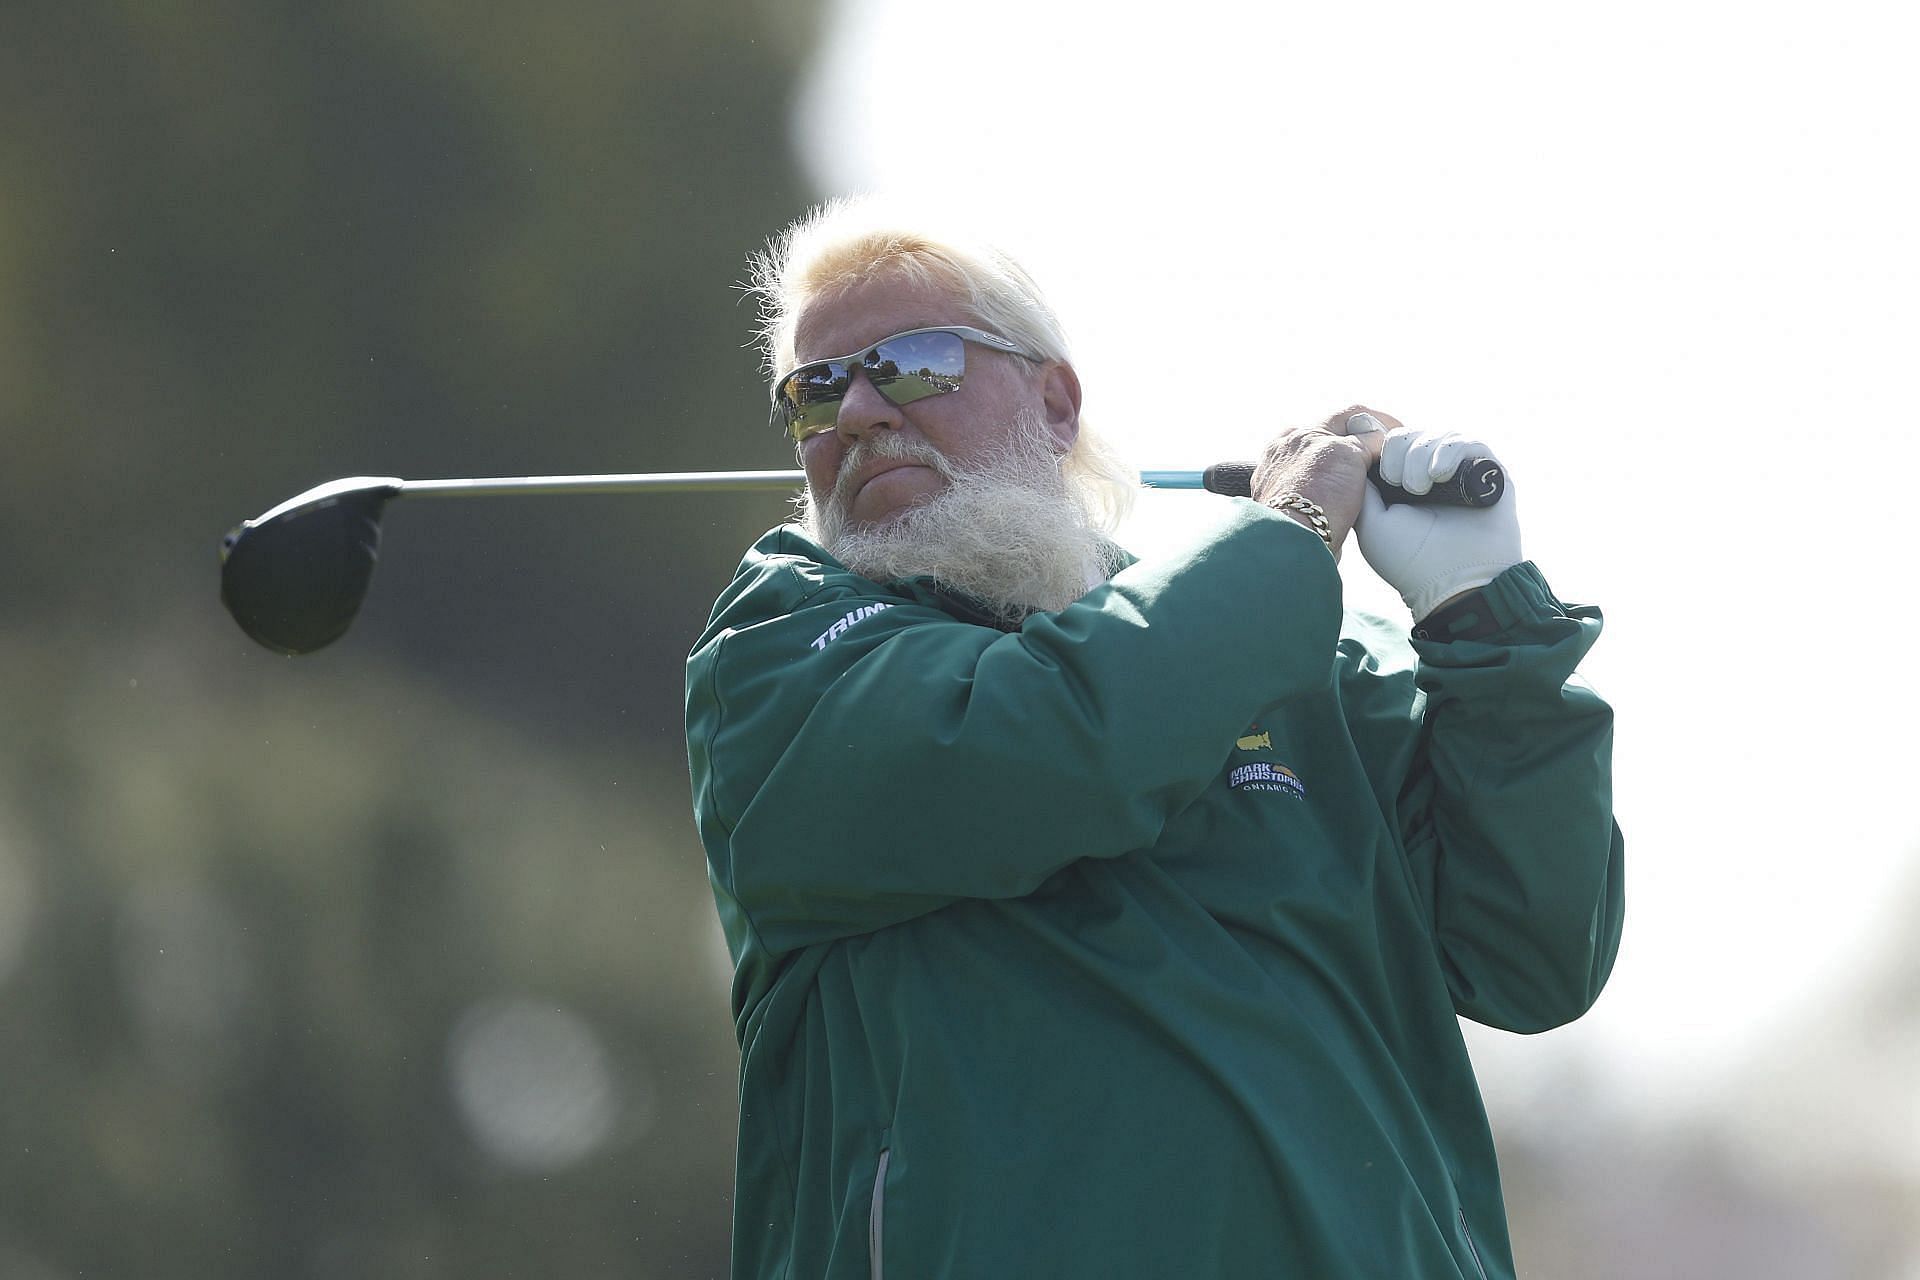 John Daly is set to compete at the 2023 PNC Championship